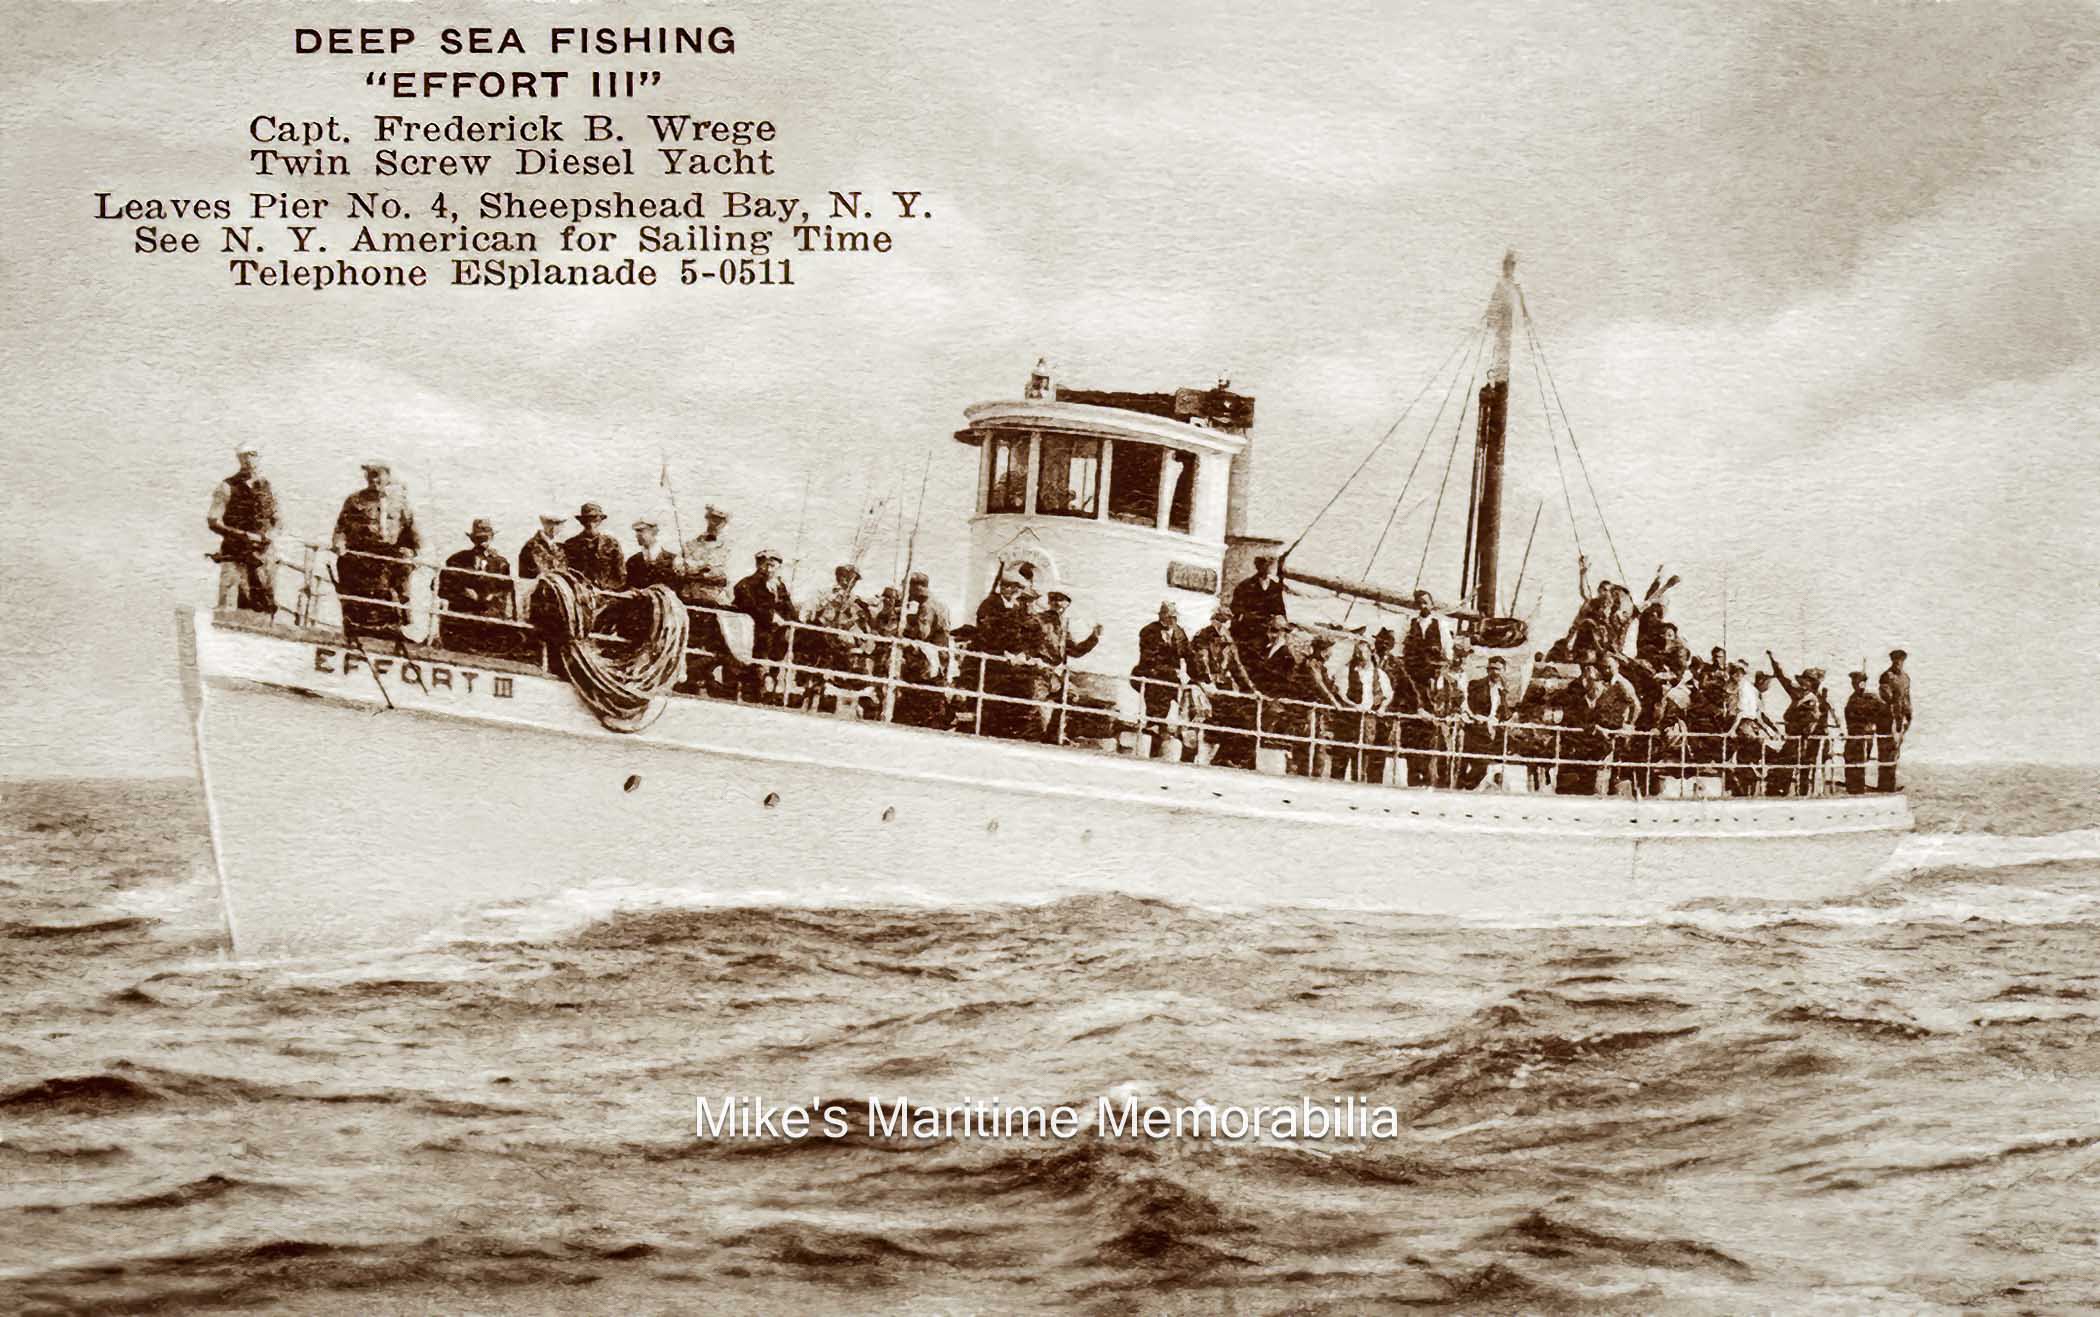 EFFORT III Postcard, Brooklyn, NY – 1935 Captain Frederick B. Wrege's "EFFORT III" from Sheepshead Bay, Brooklyn, NY circa 1935. The "EFFORT III" was a converted World War I U.S. Navy Sub Chaser ("SC-122") that was built in 1917 by the Norfolk Navy Yard at Portsmouth, VA. Captain Wrege purchased the boat in 1927 and converted her for party boat fishing. The photo is courtesy of the Captain Fred Wrege and Captain Charles VanDerVoort families.